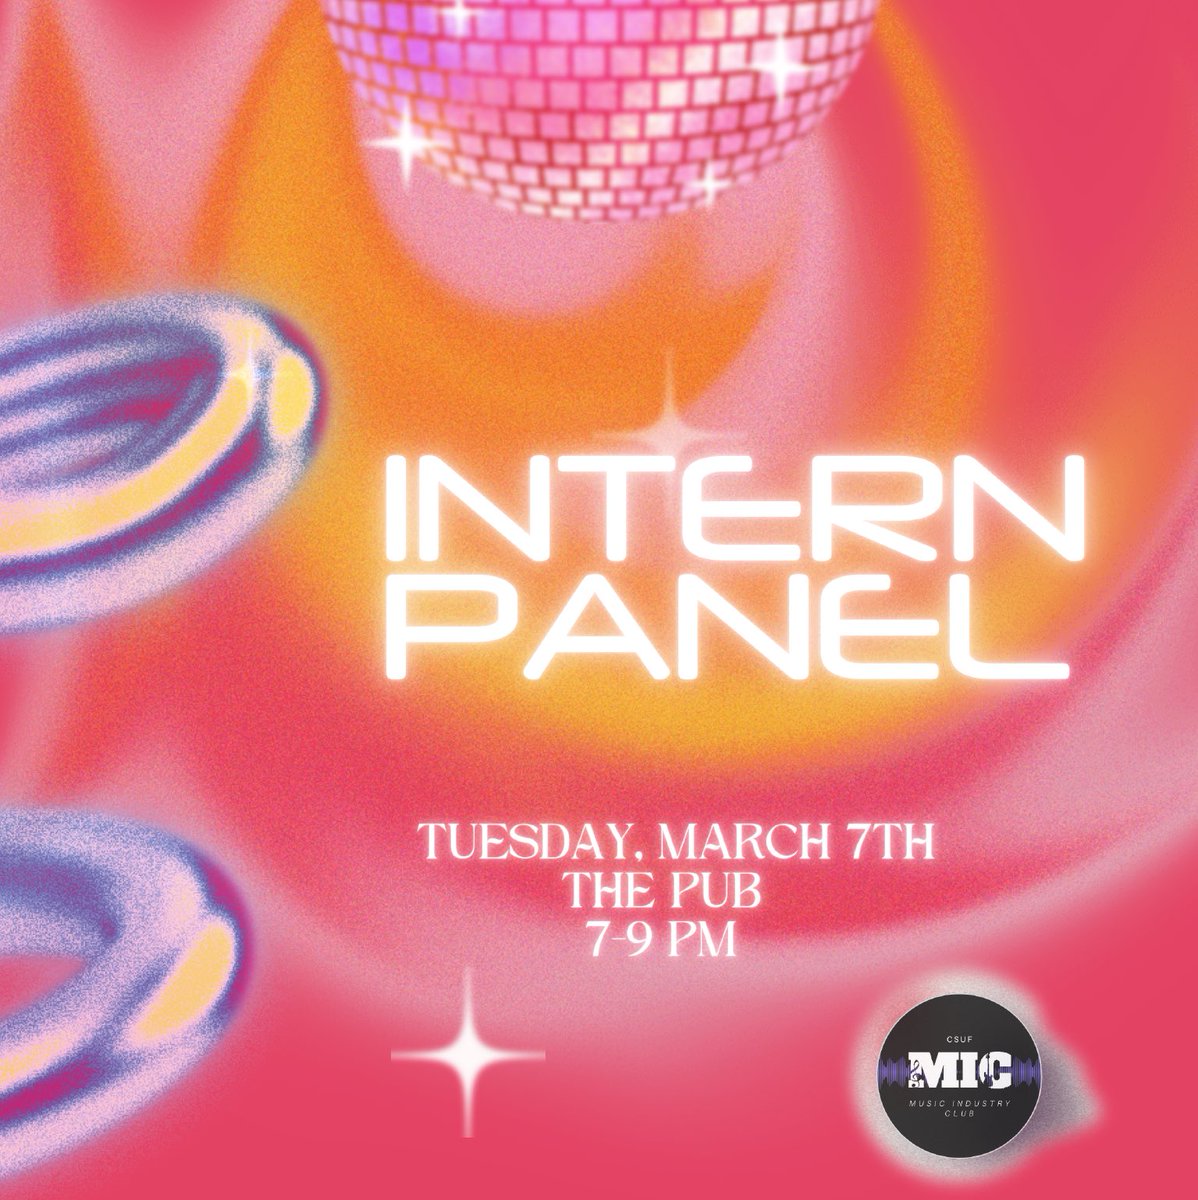 💜 Intern Panel 🧡

Join us for our Intern Panel this Tuesday (3/7) at 7PM! 🎶
Location: TSU The Pub 📍

You will get the chance to learn from students who have interned at music companies. 
We hope to see you there! 🧡

#csuf #csufmic #csufullerton #commcsuf #bicccsuf